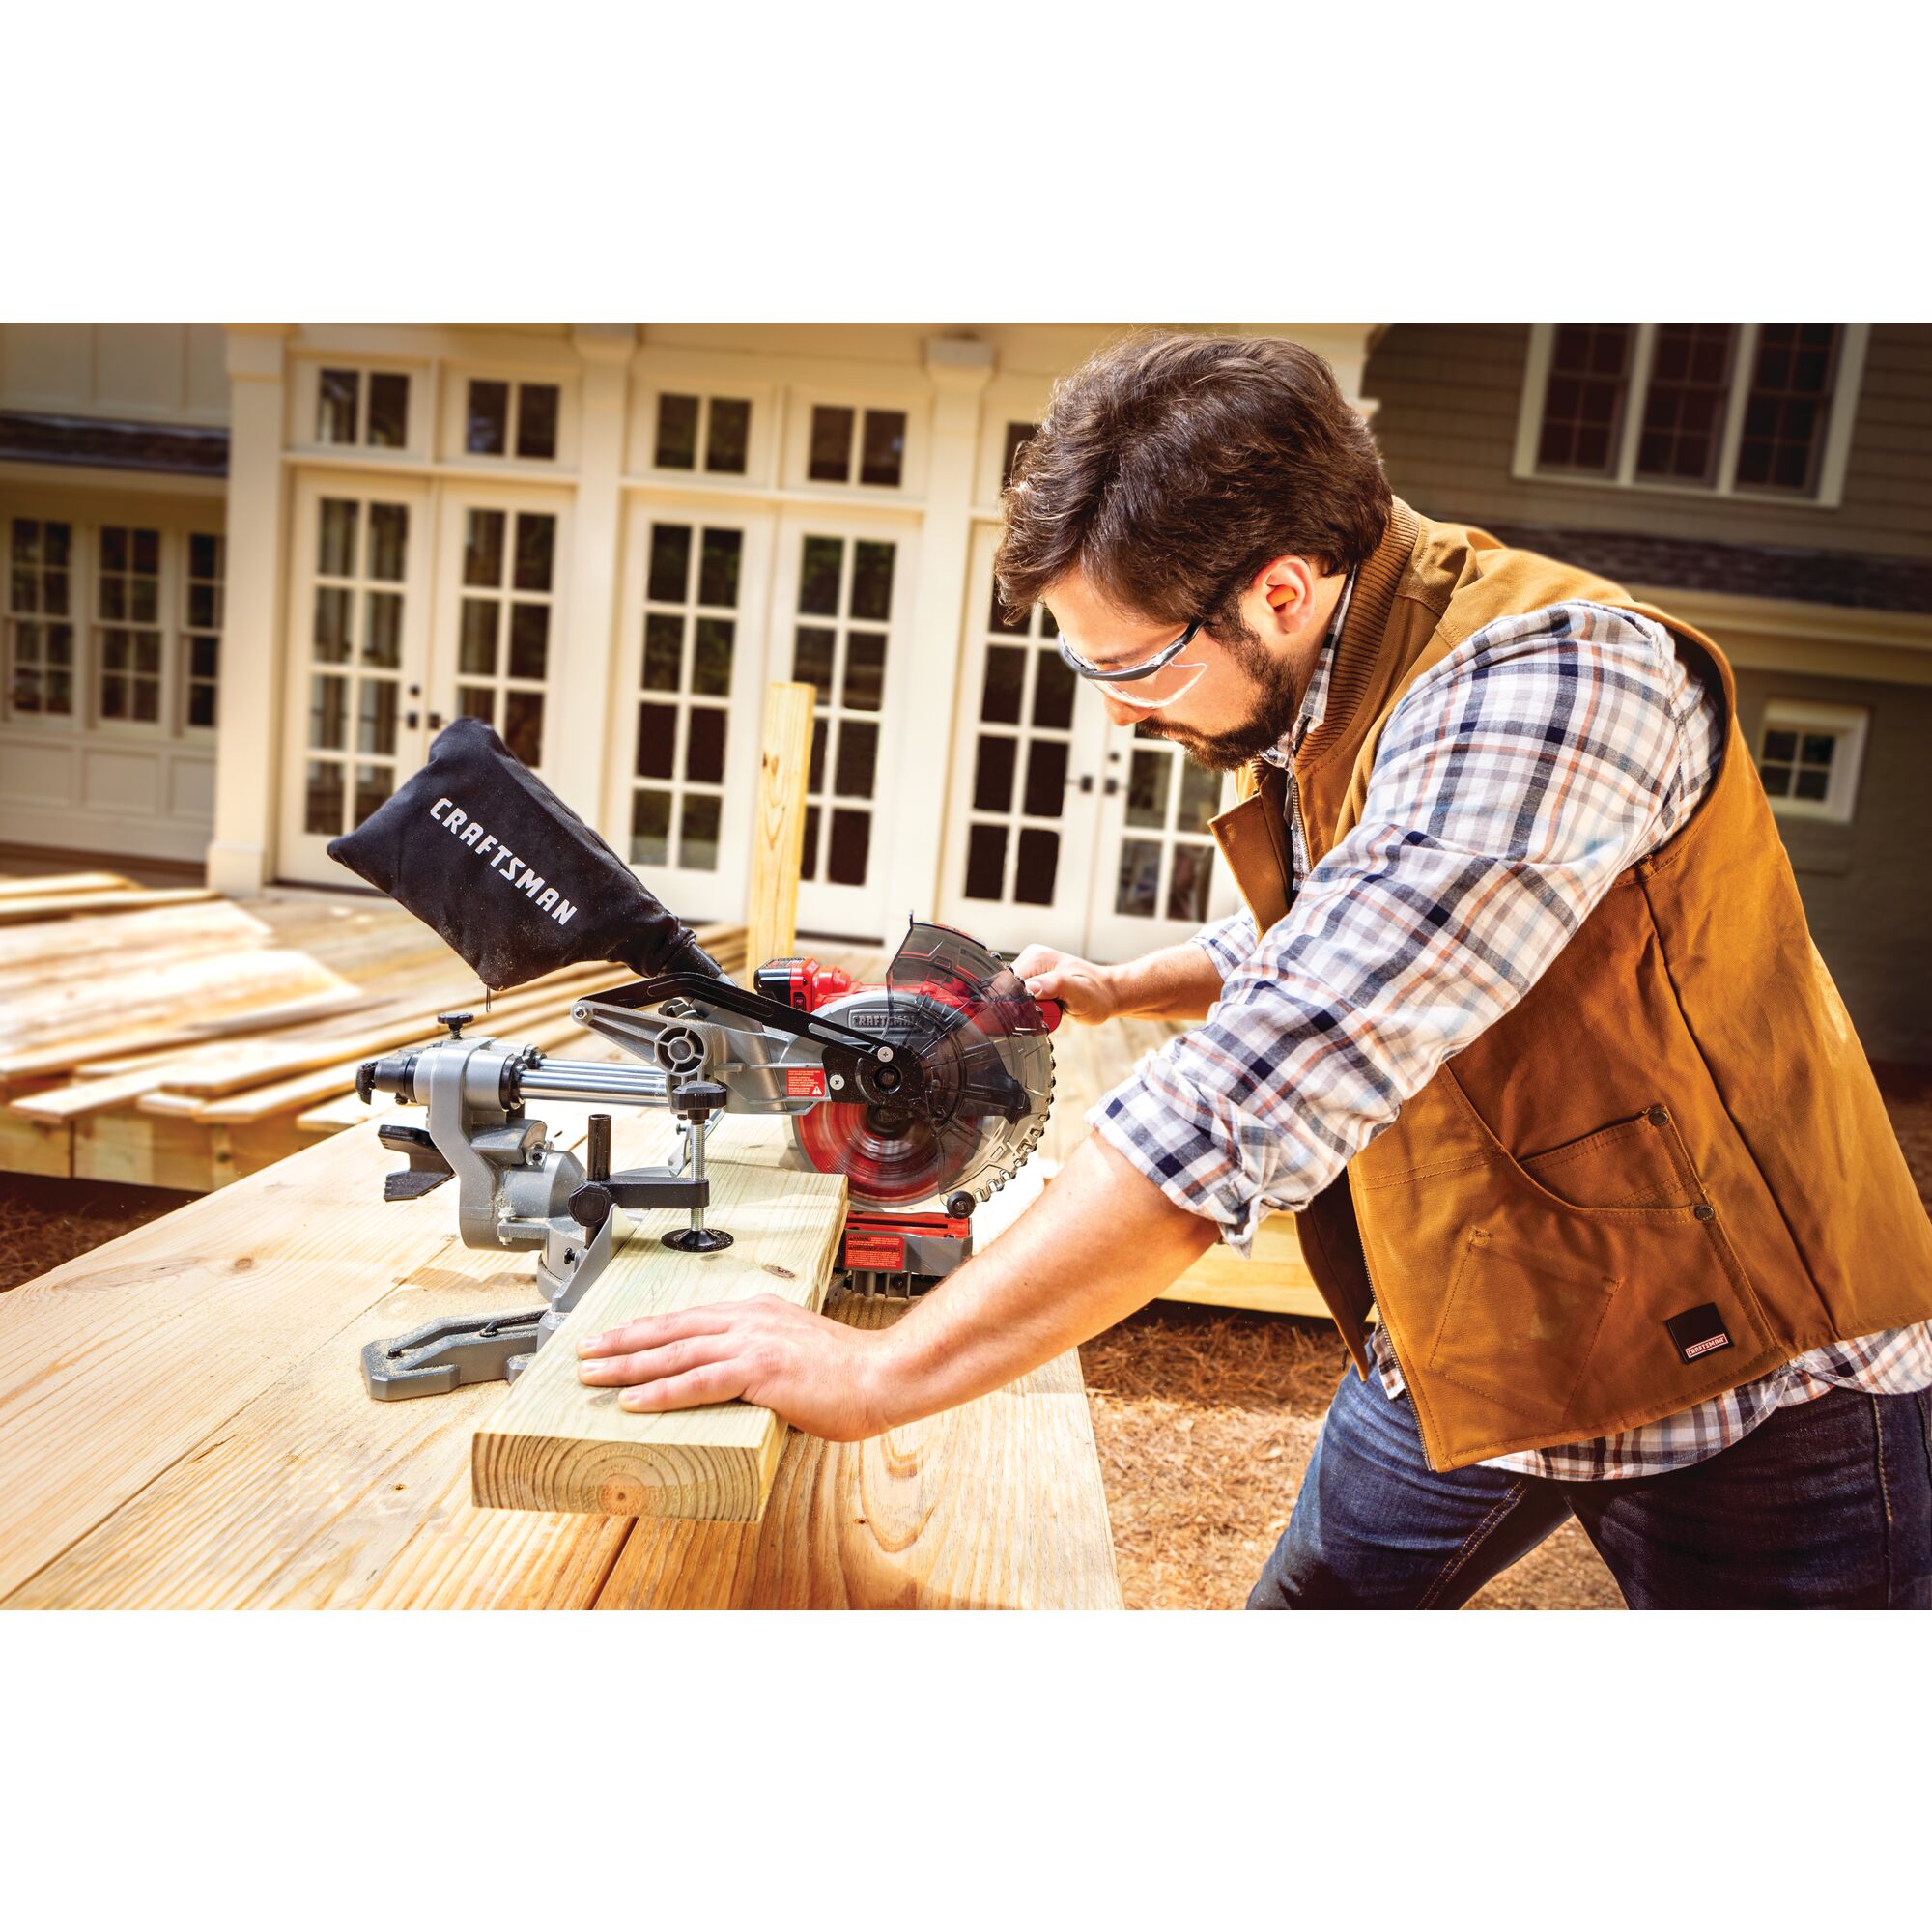 20 volt cordless 7 1 quarter inch sliding miter saw kit being used by a person to cut a wooden plank.